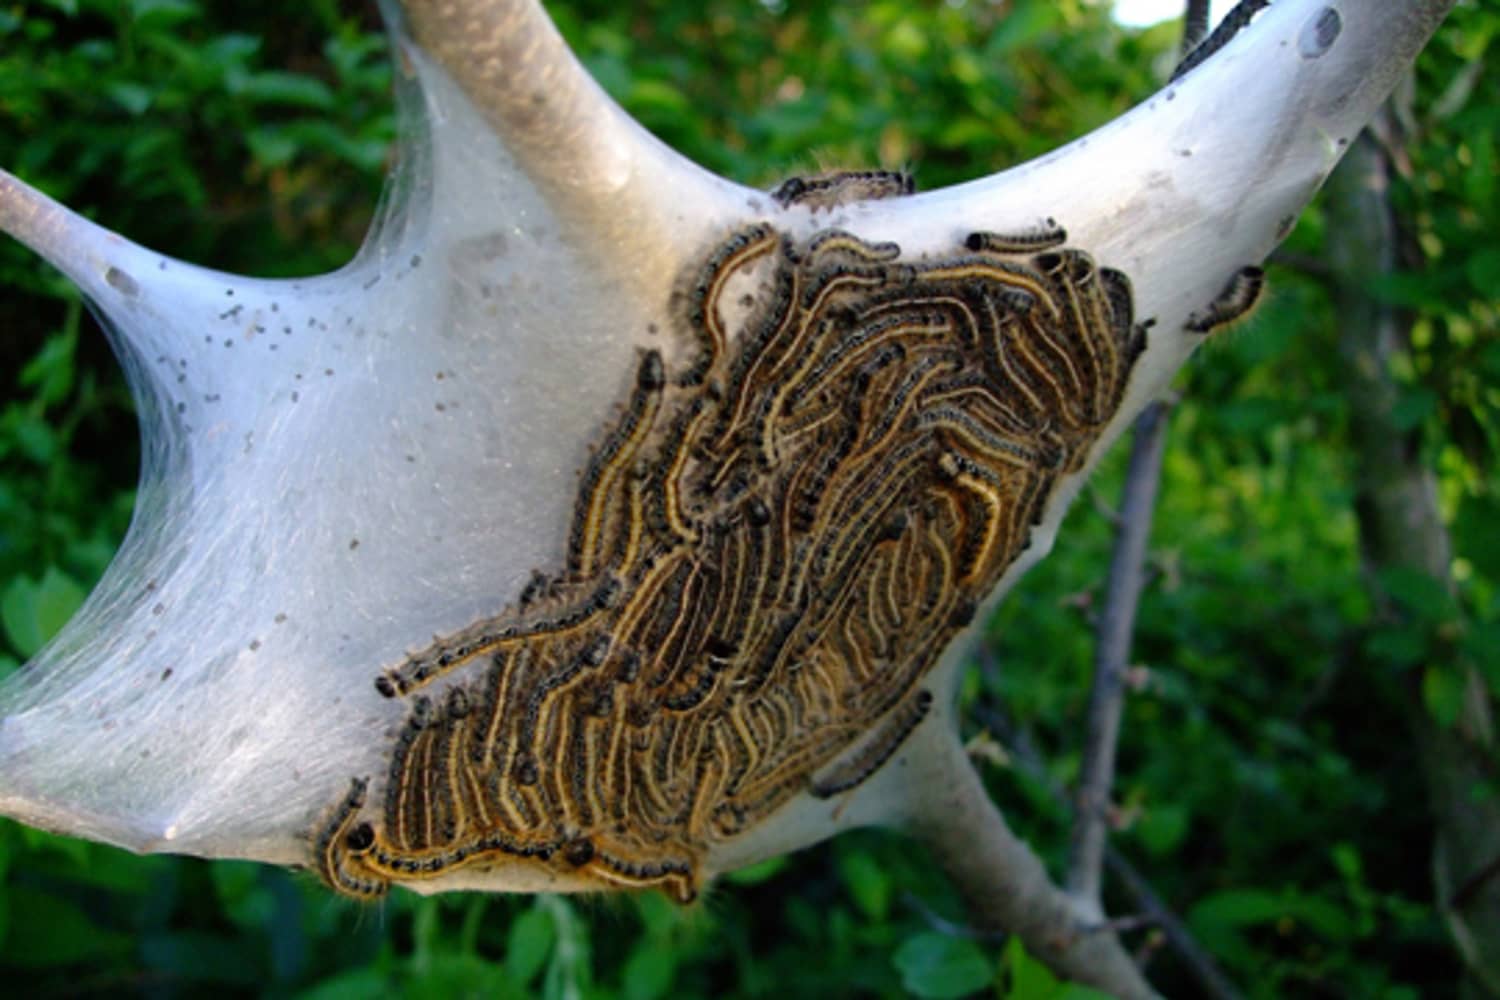 Web Worms, Bag Worms and Eastern Tent Caterpillars: What's the